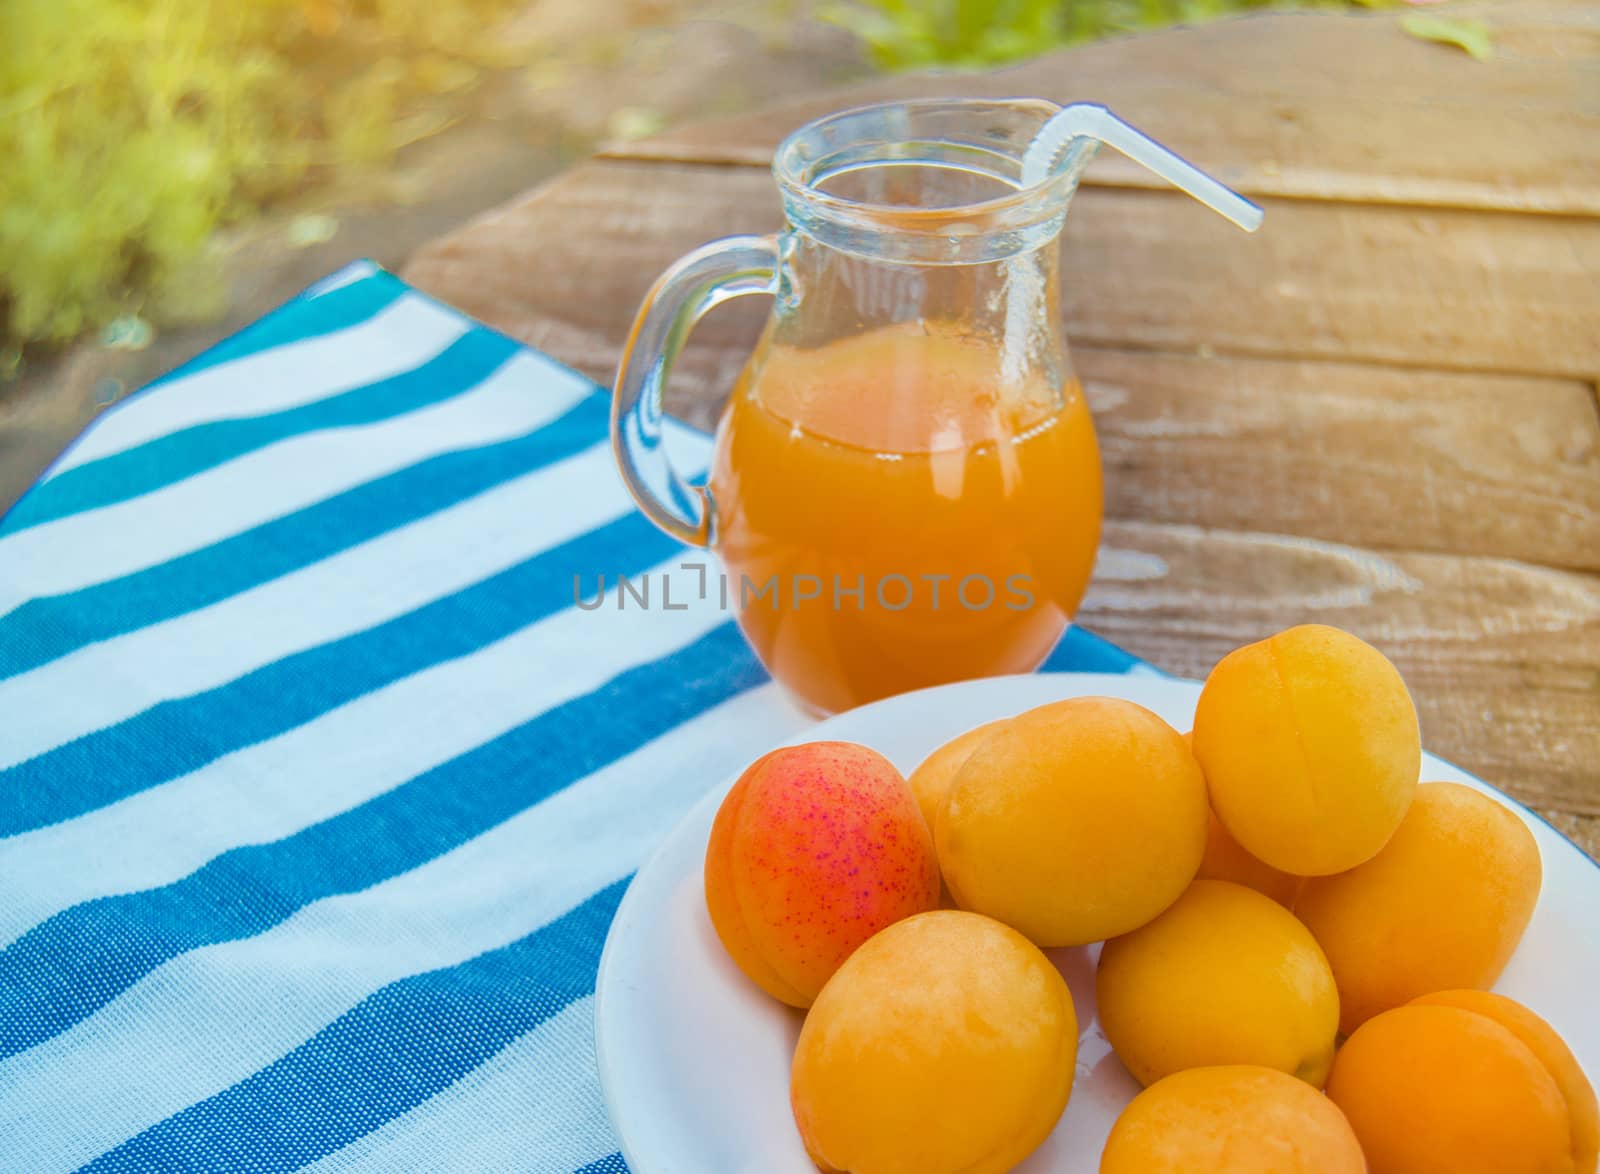 Summer drink and fruit-fresh apricot juice in a glass jug and ripe apricots on a napkin, outdoors on a Sunny day by claire_lucia